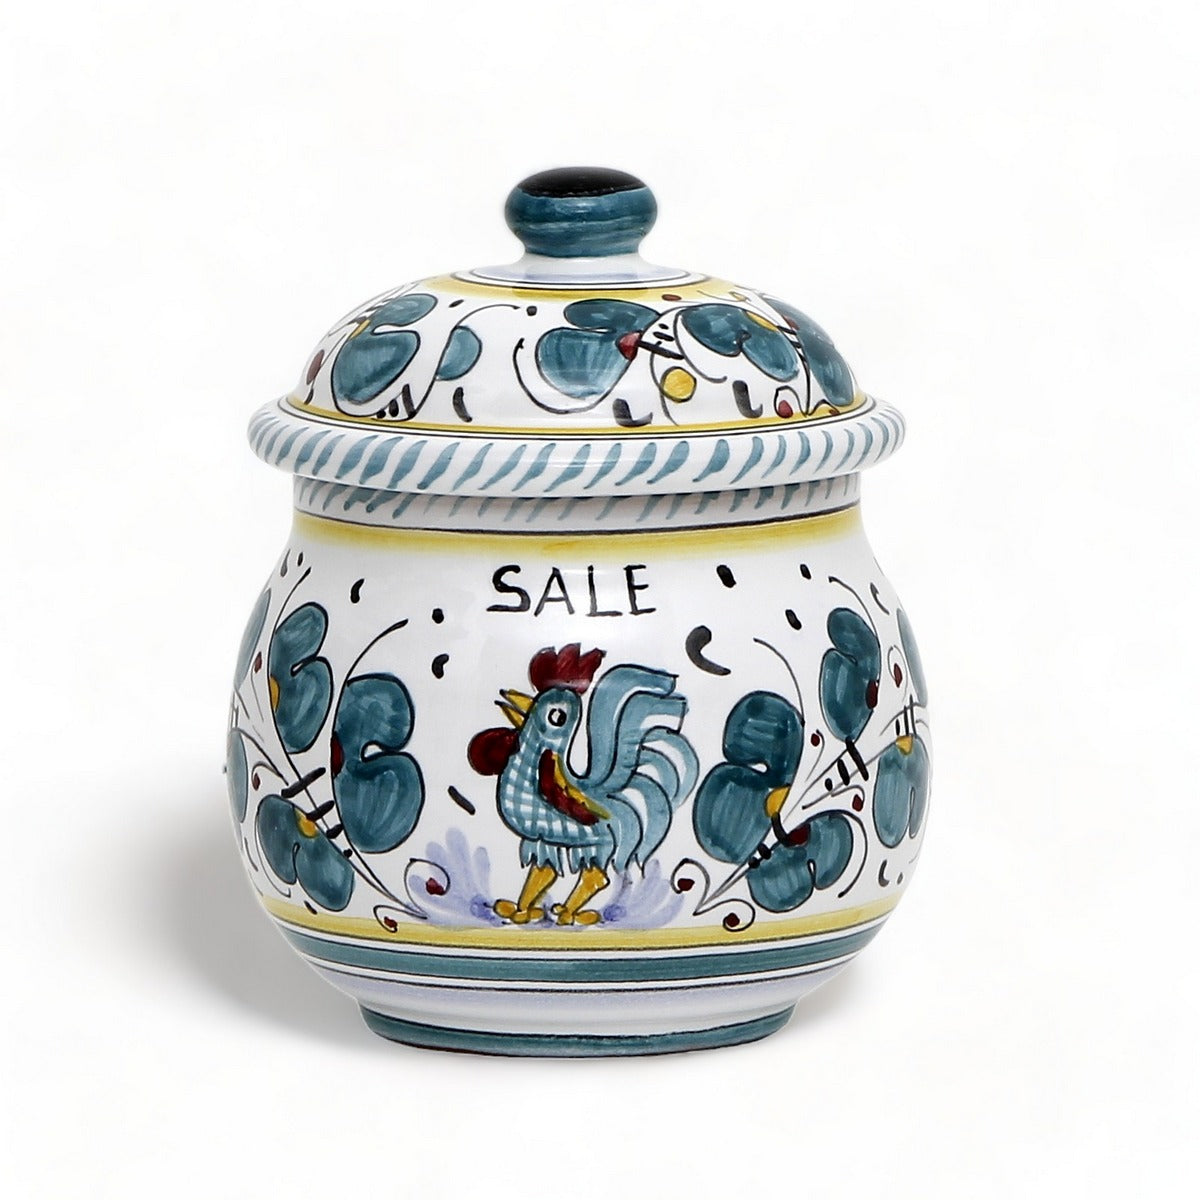 ORVIETO GREEN ROOSTER: Round SALE (Salt) Box Canister with rubber sealing lid [R]